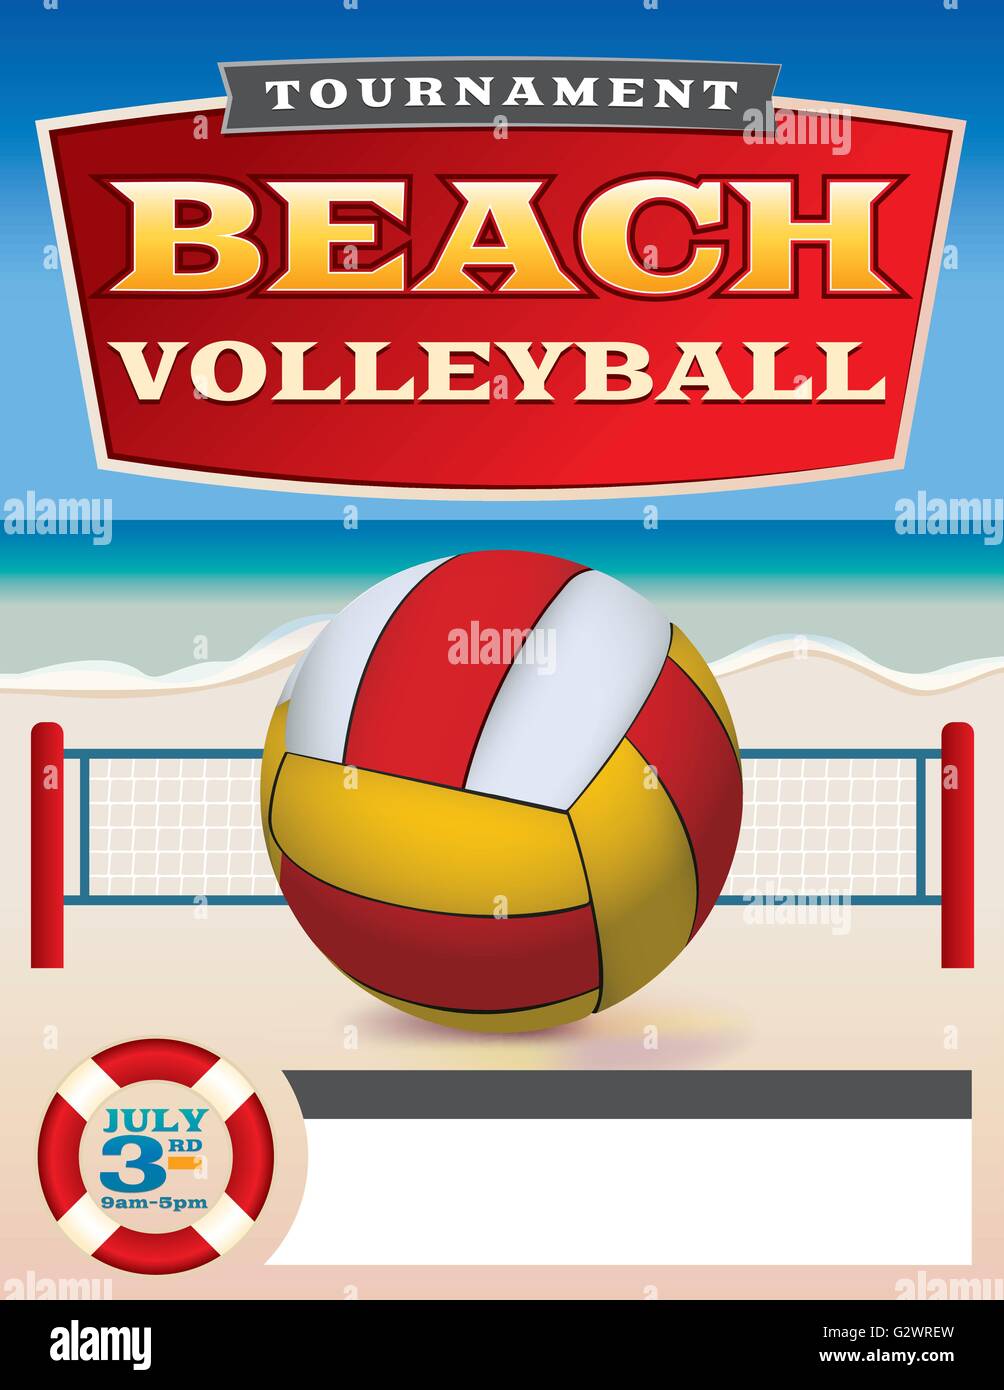 A flyer or poster template for a beach volleyball tournament. Vector EPS 10 illustration available. EPS file contains transparen Stock Vector